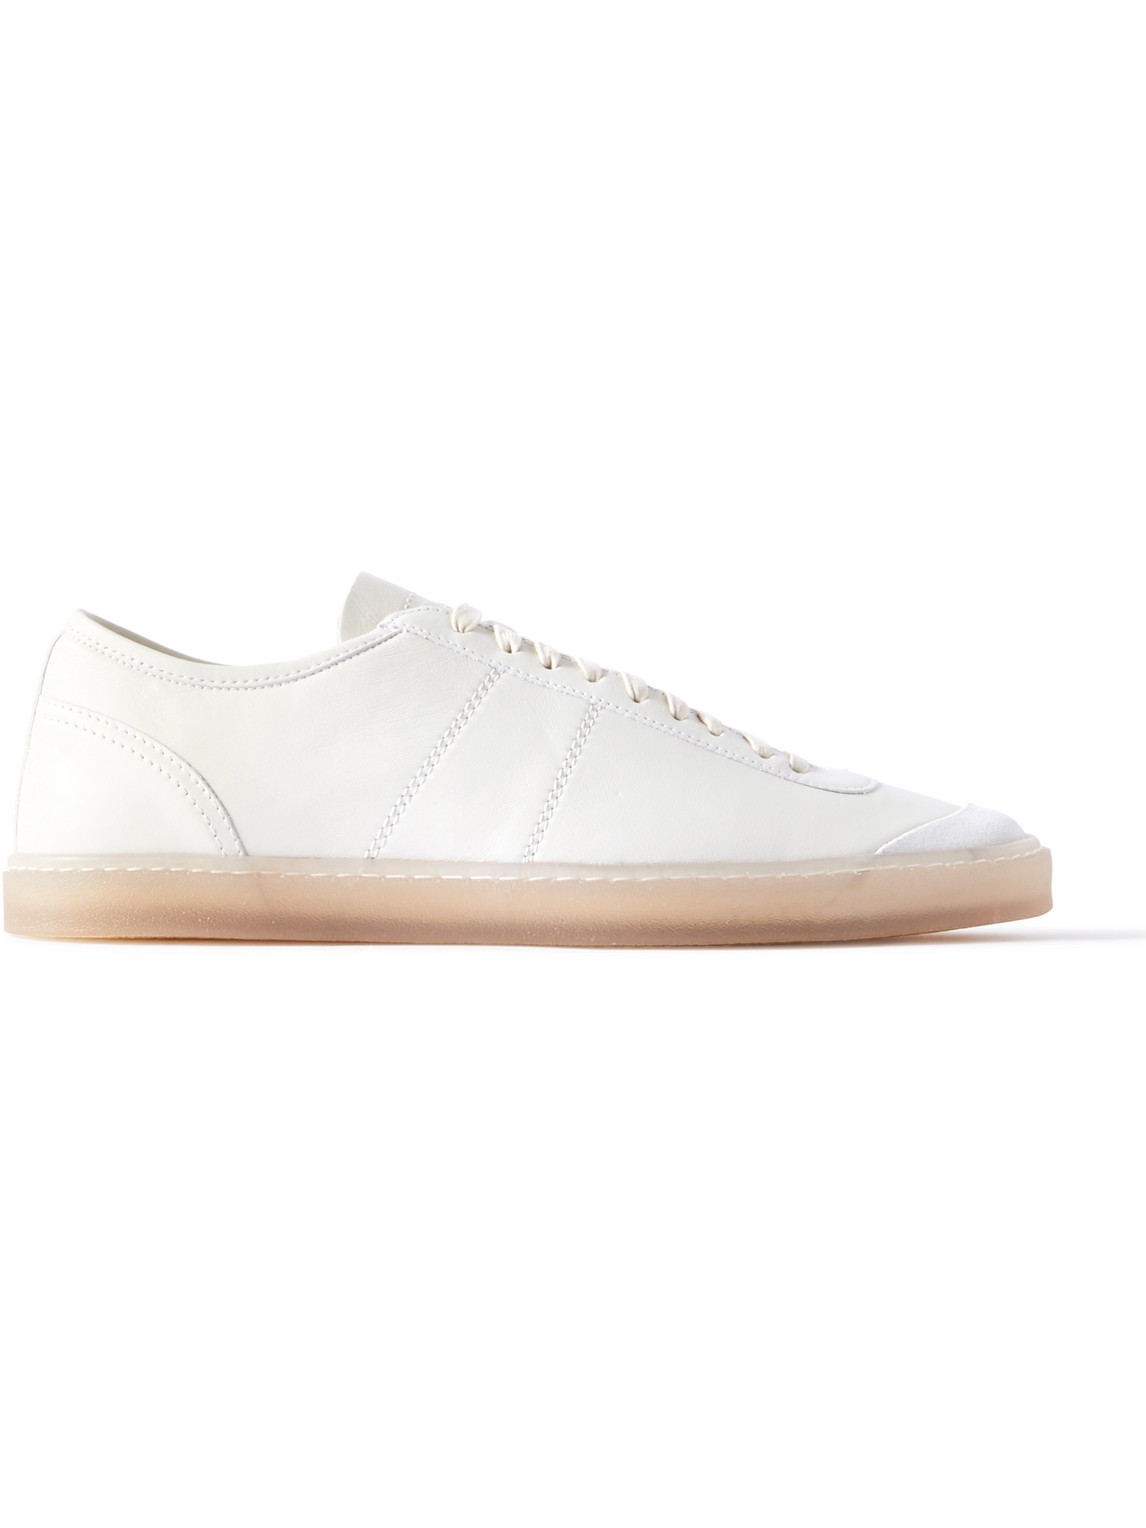 Suede-Trimmed Leather Sneakers